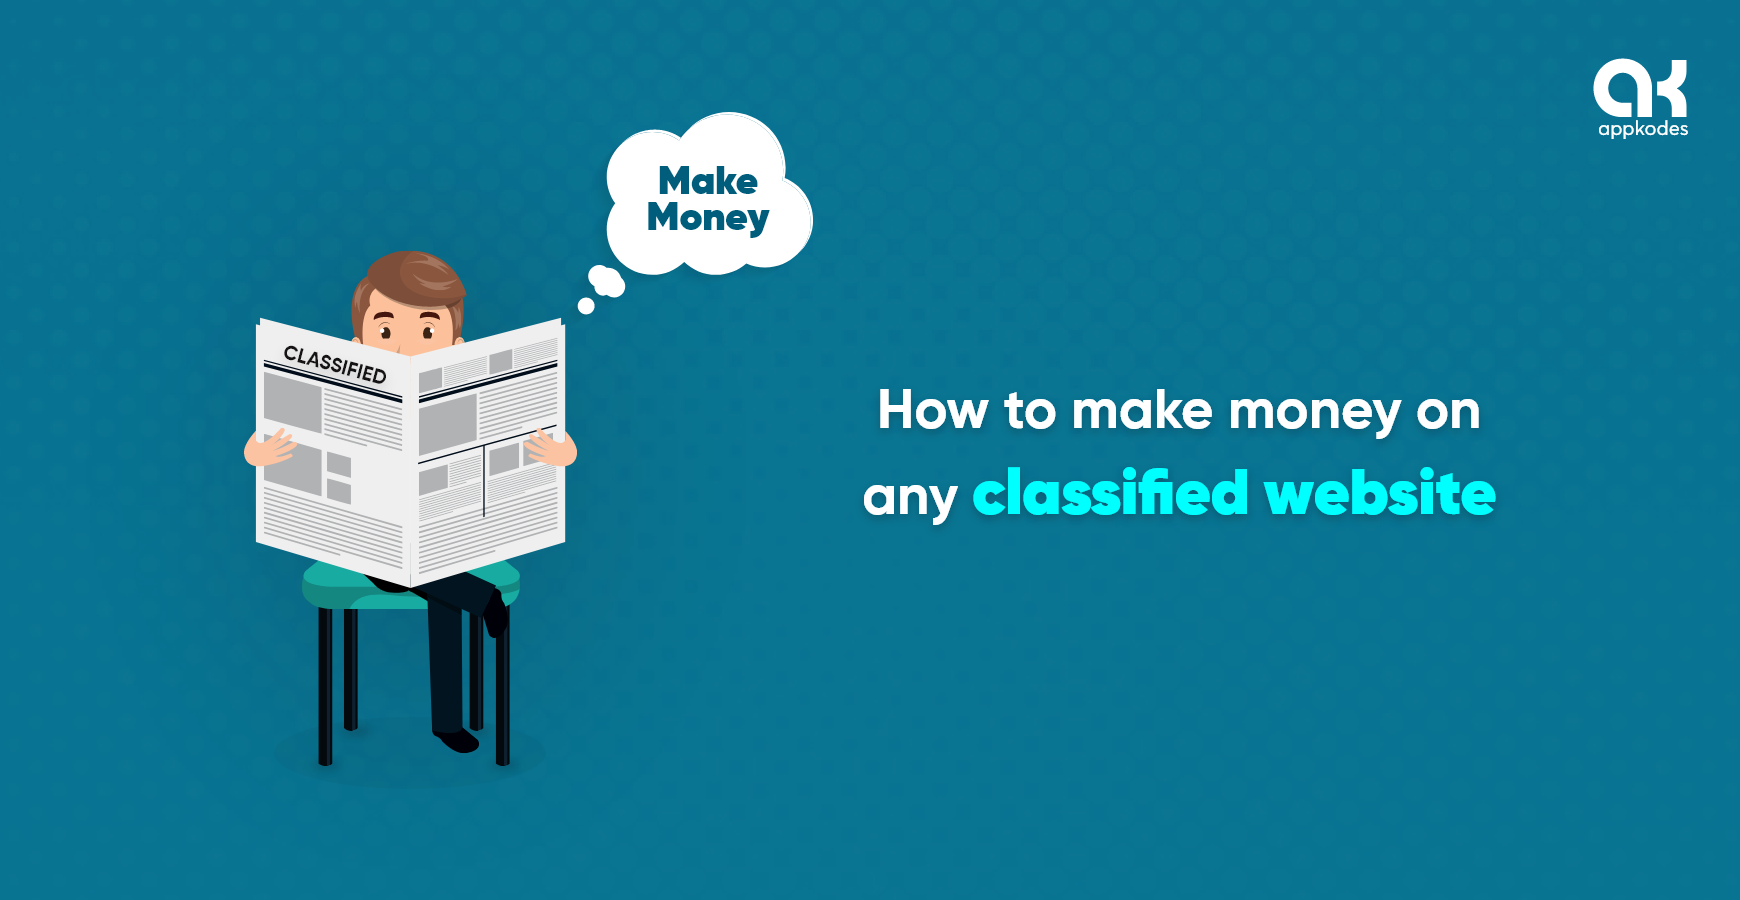 How to make money on any classified website